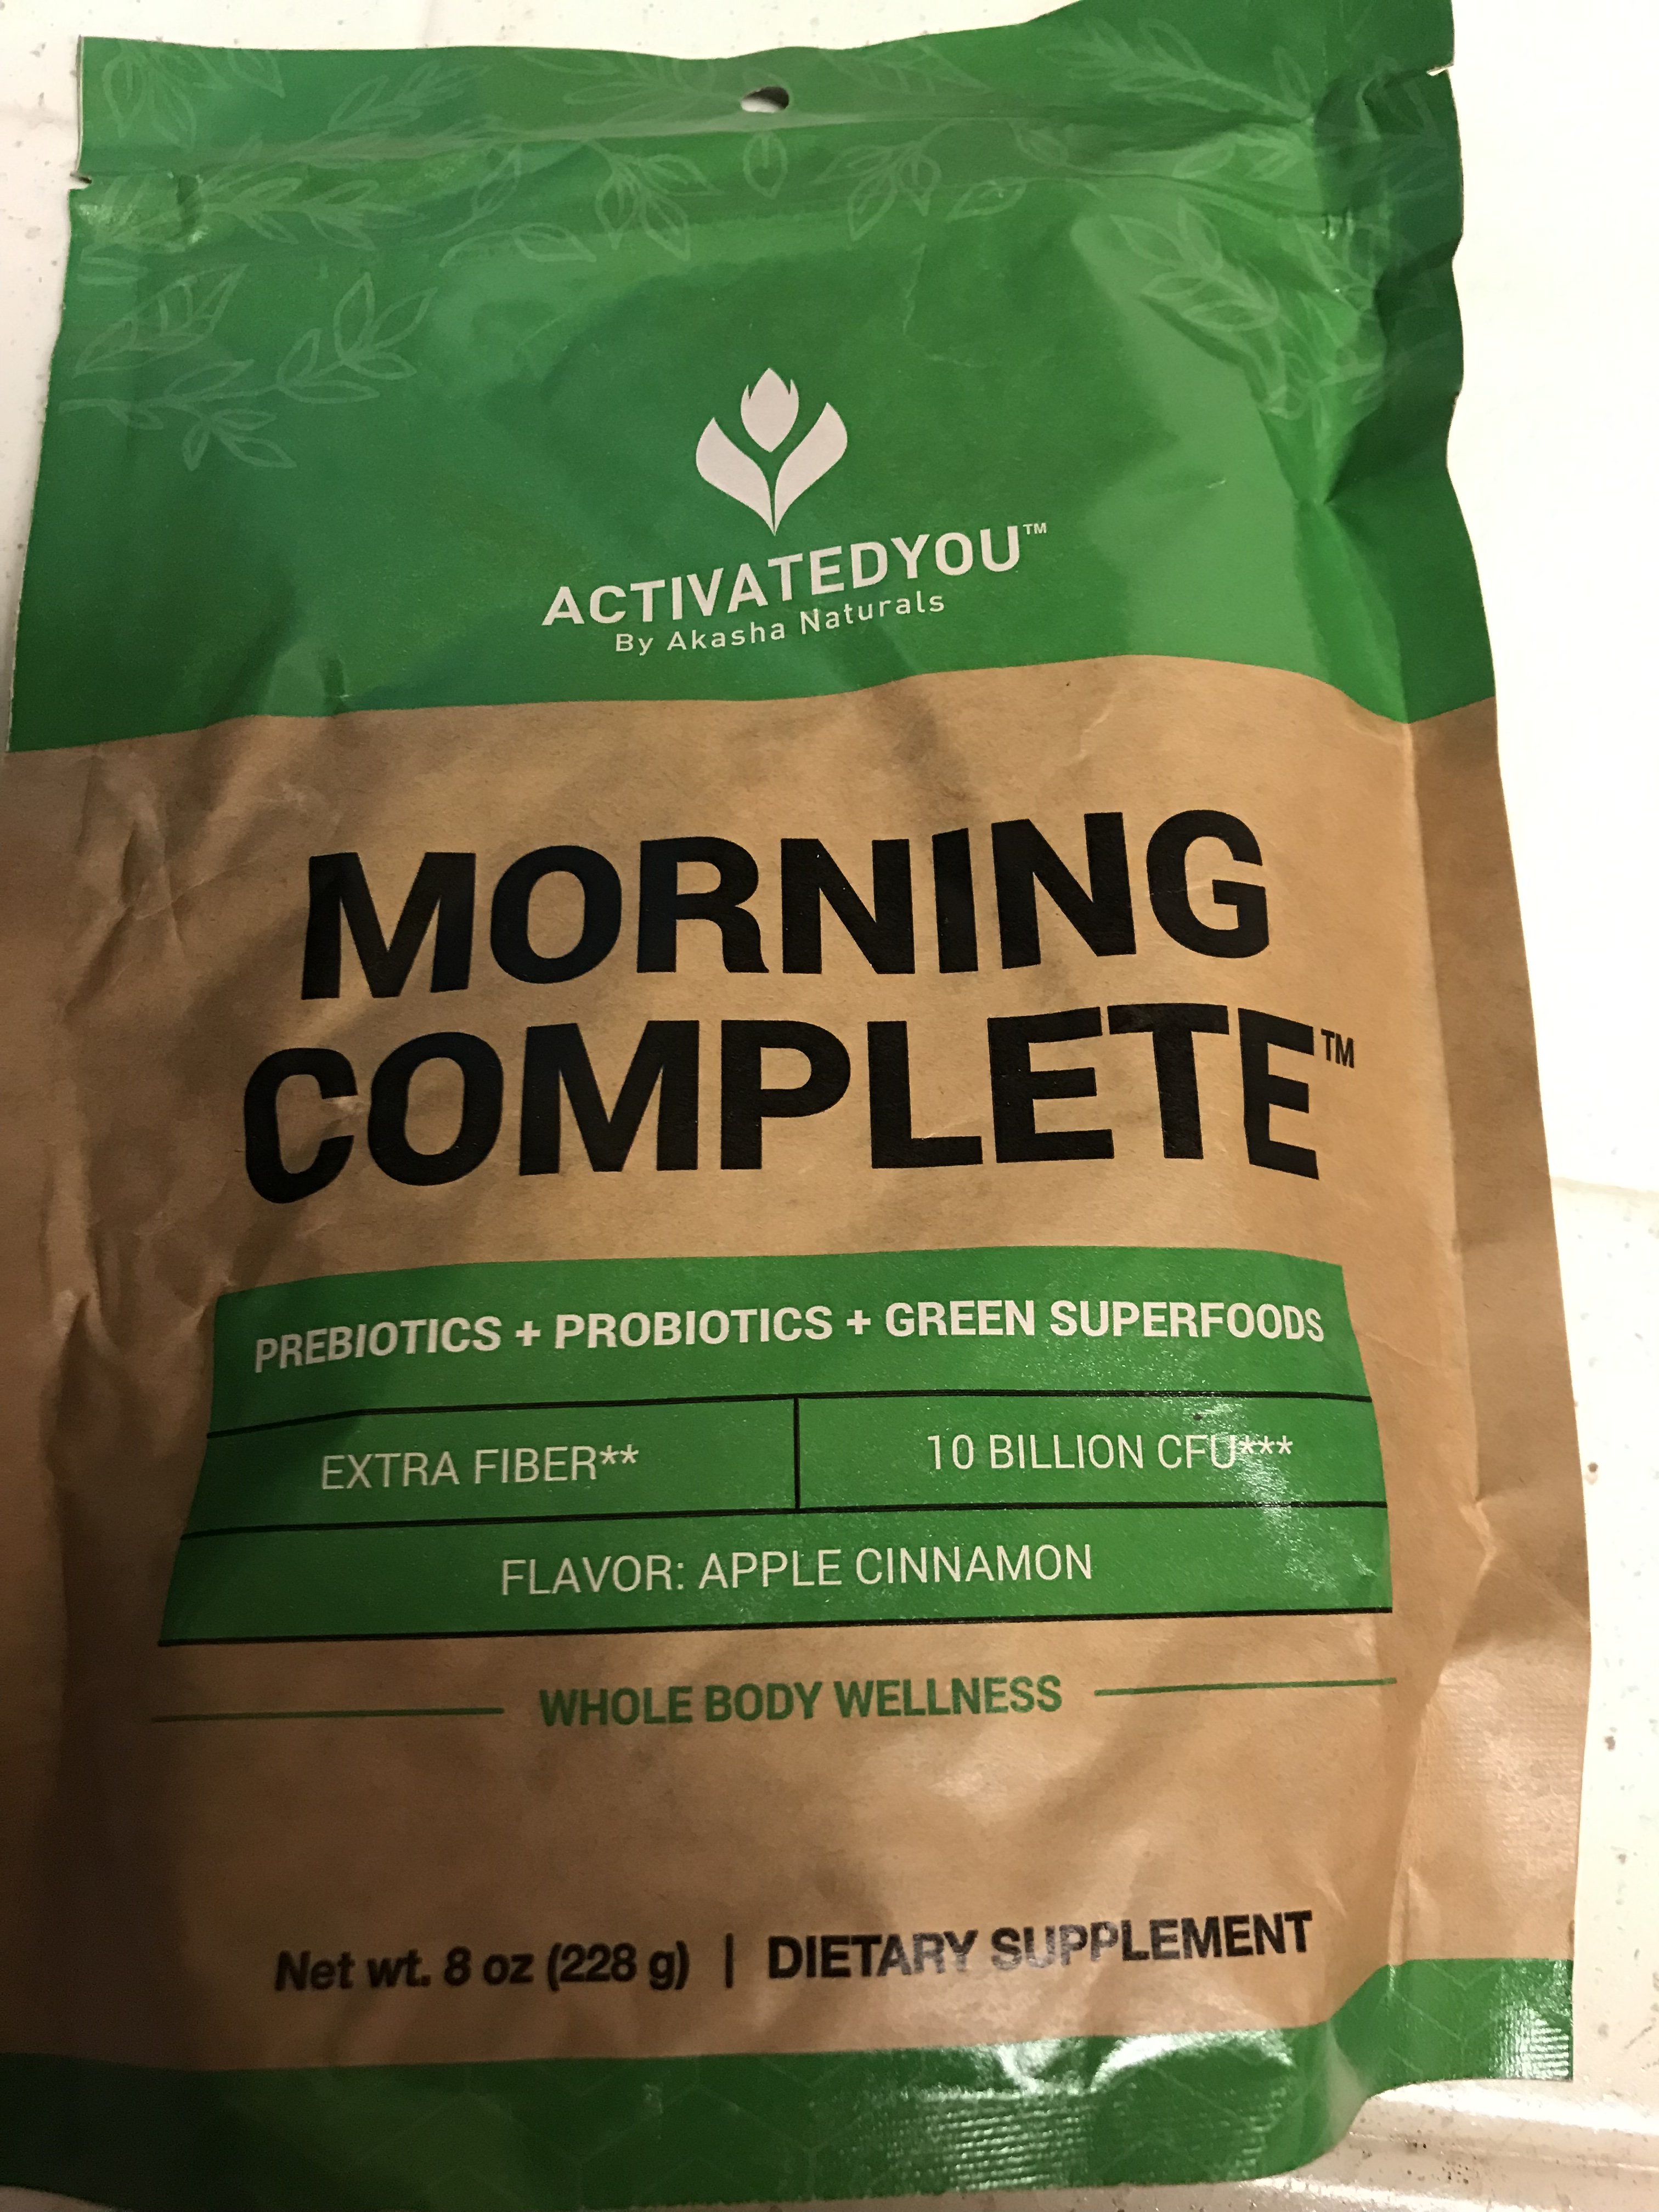 Morning Complete Prebiotic Probiotic Green Superfoods - Can I have